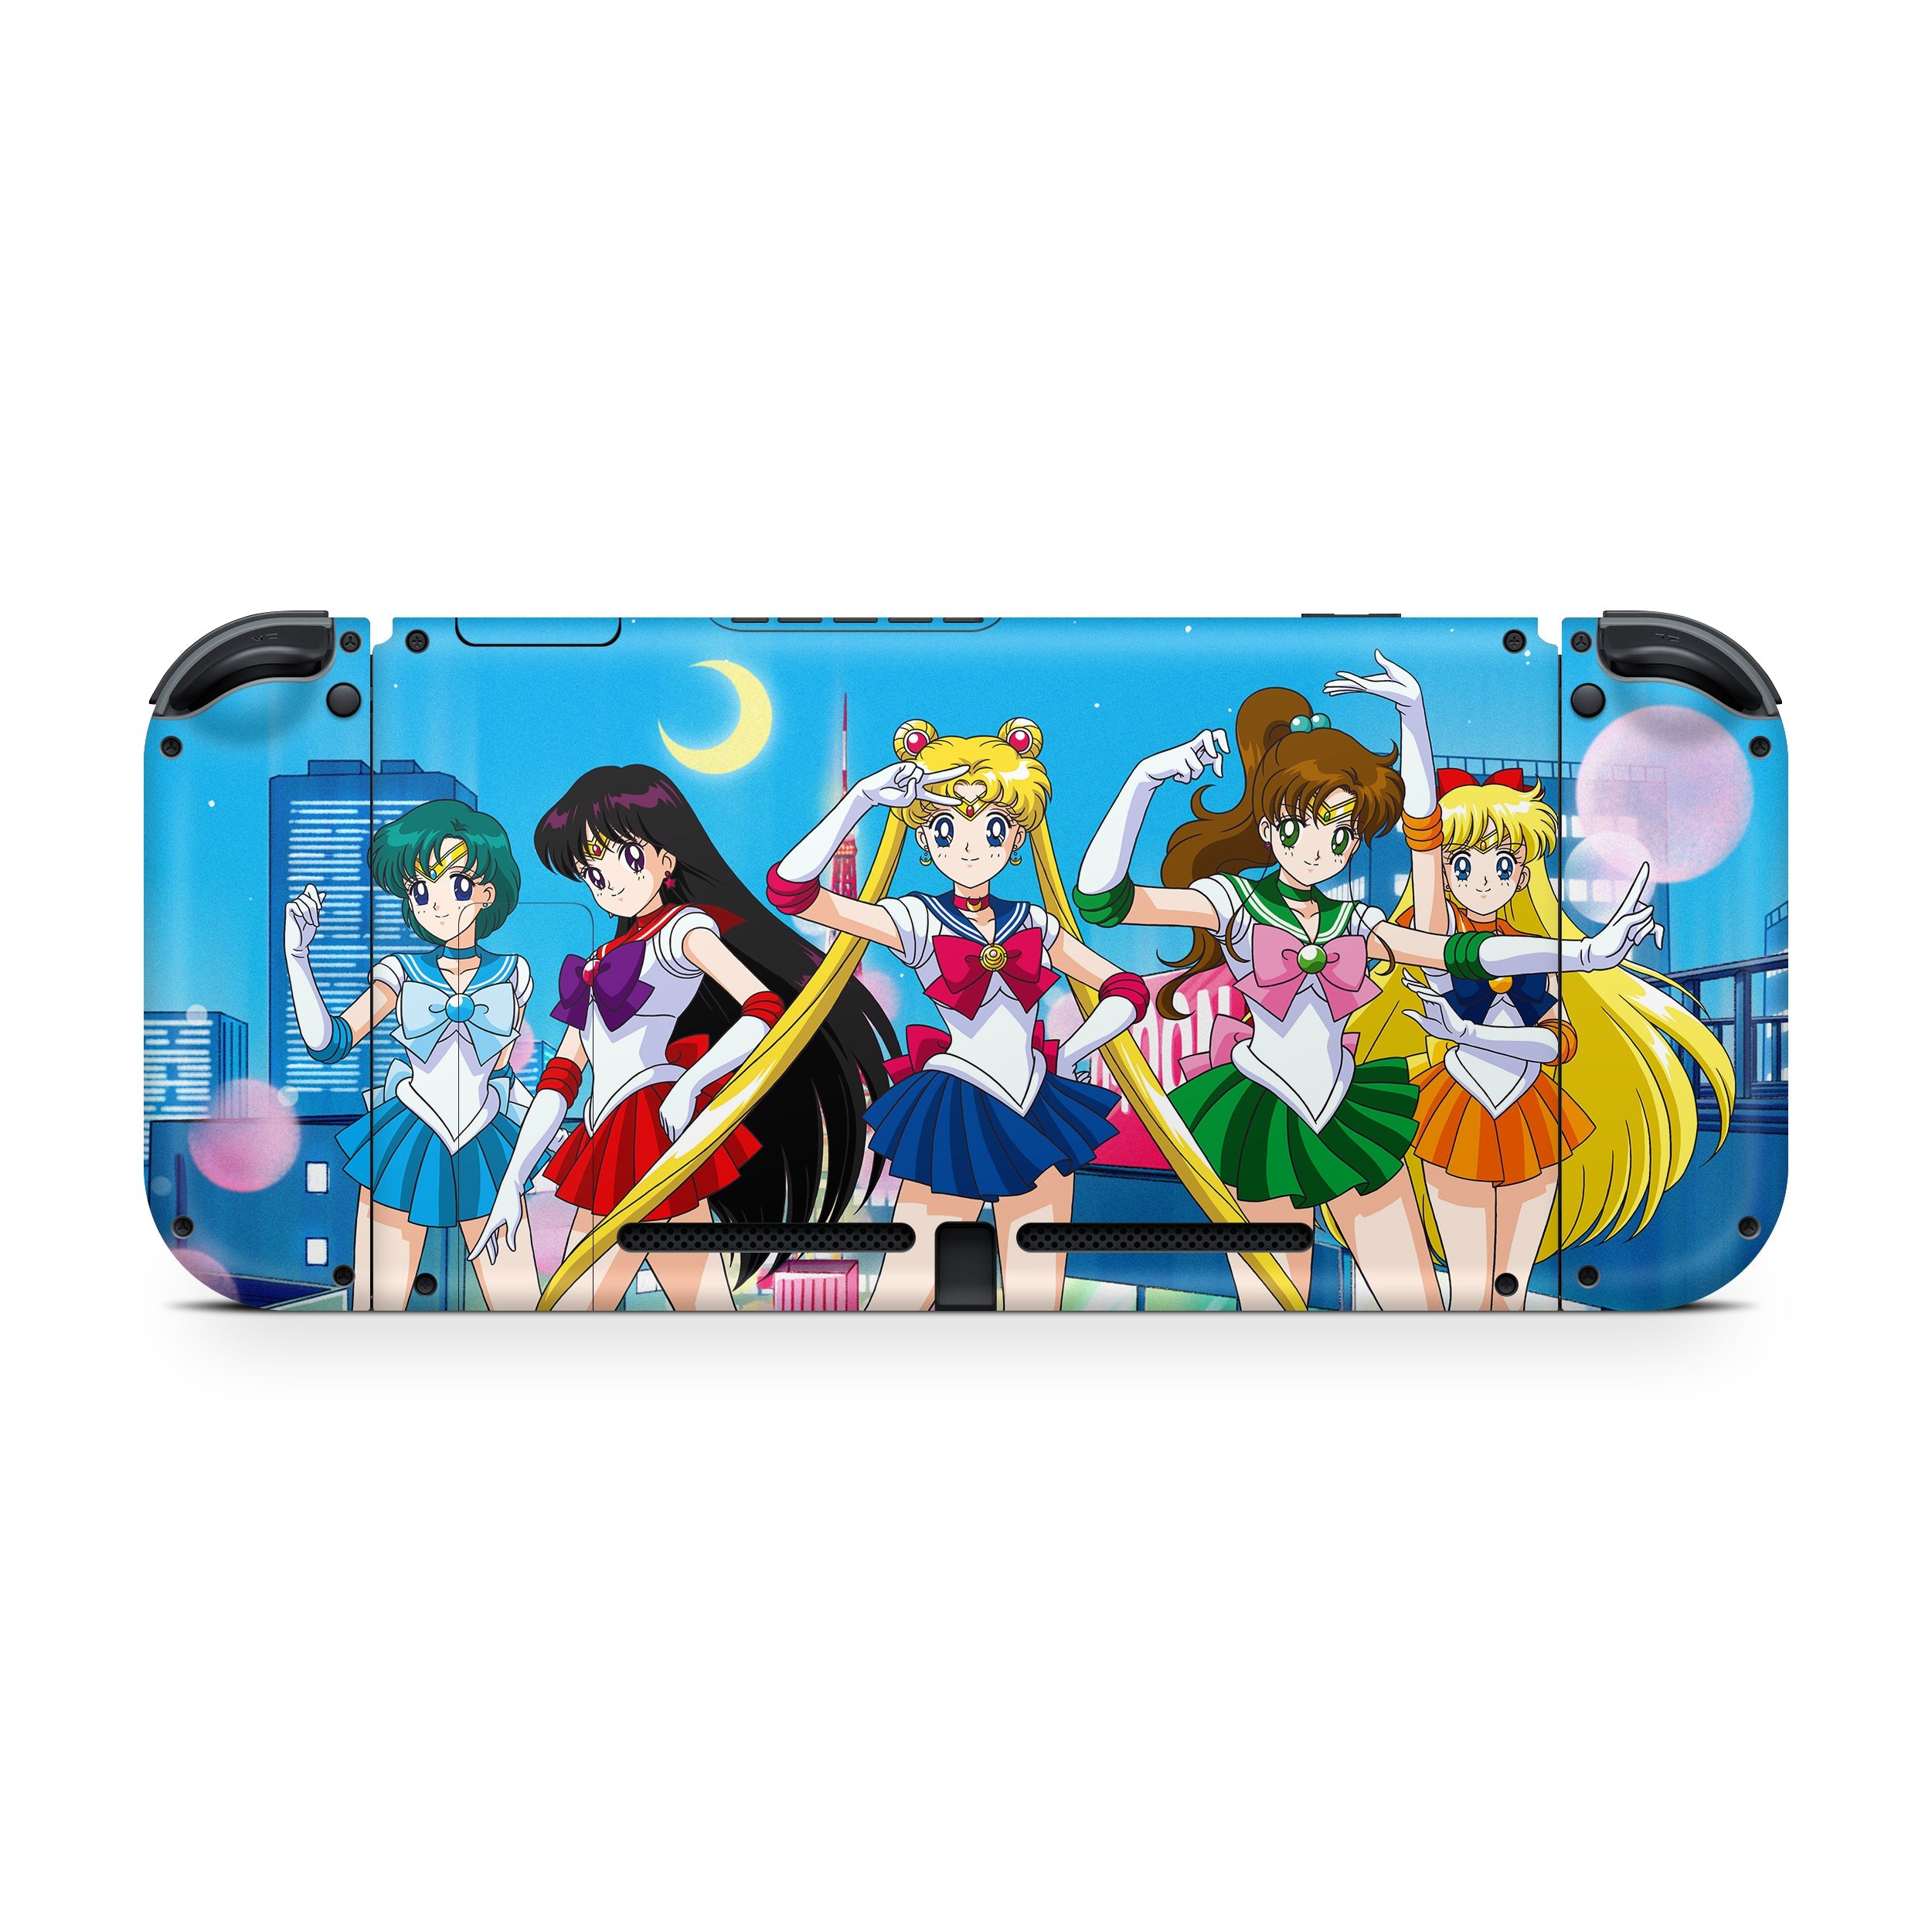 A video game skin featuring a Sailor Moon design for the Nintendo Switch.